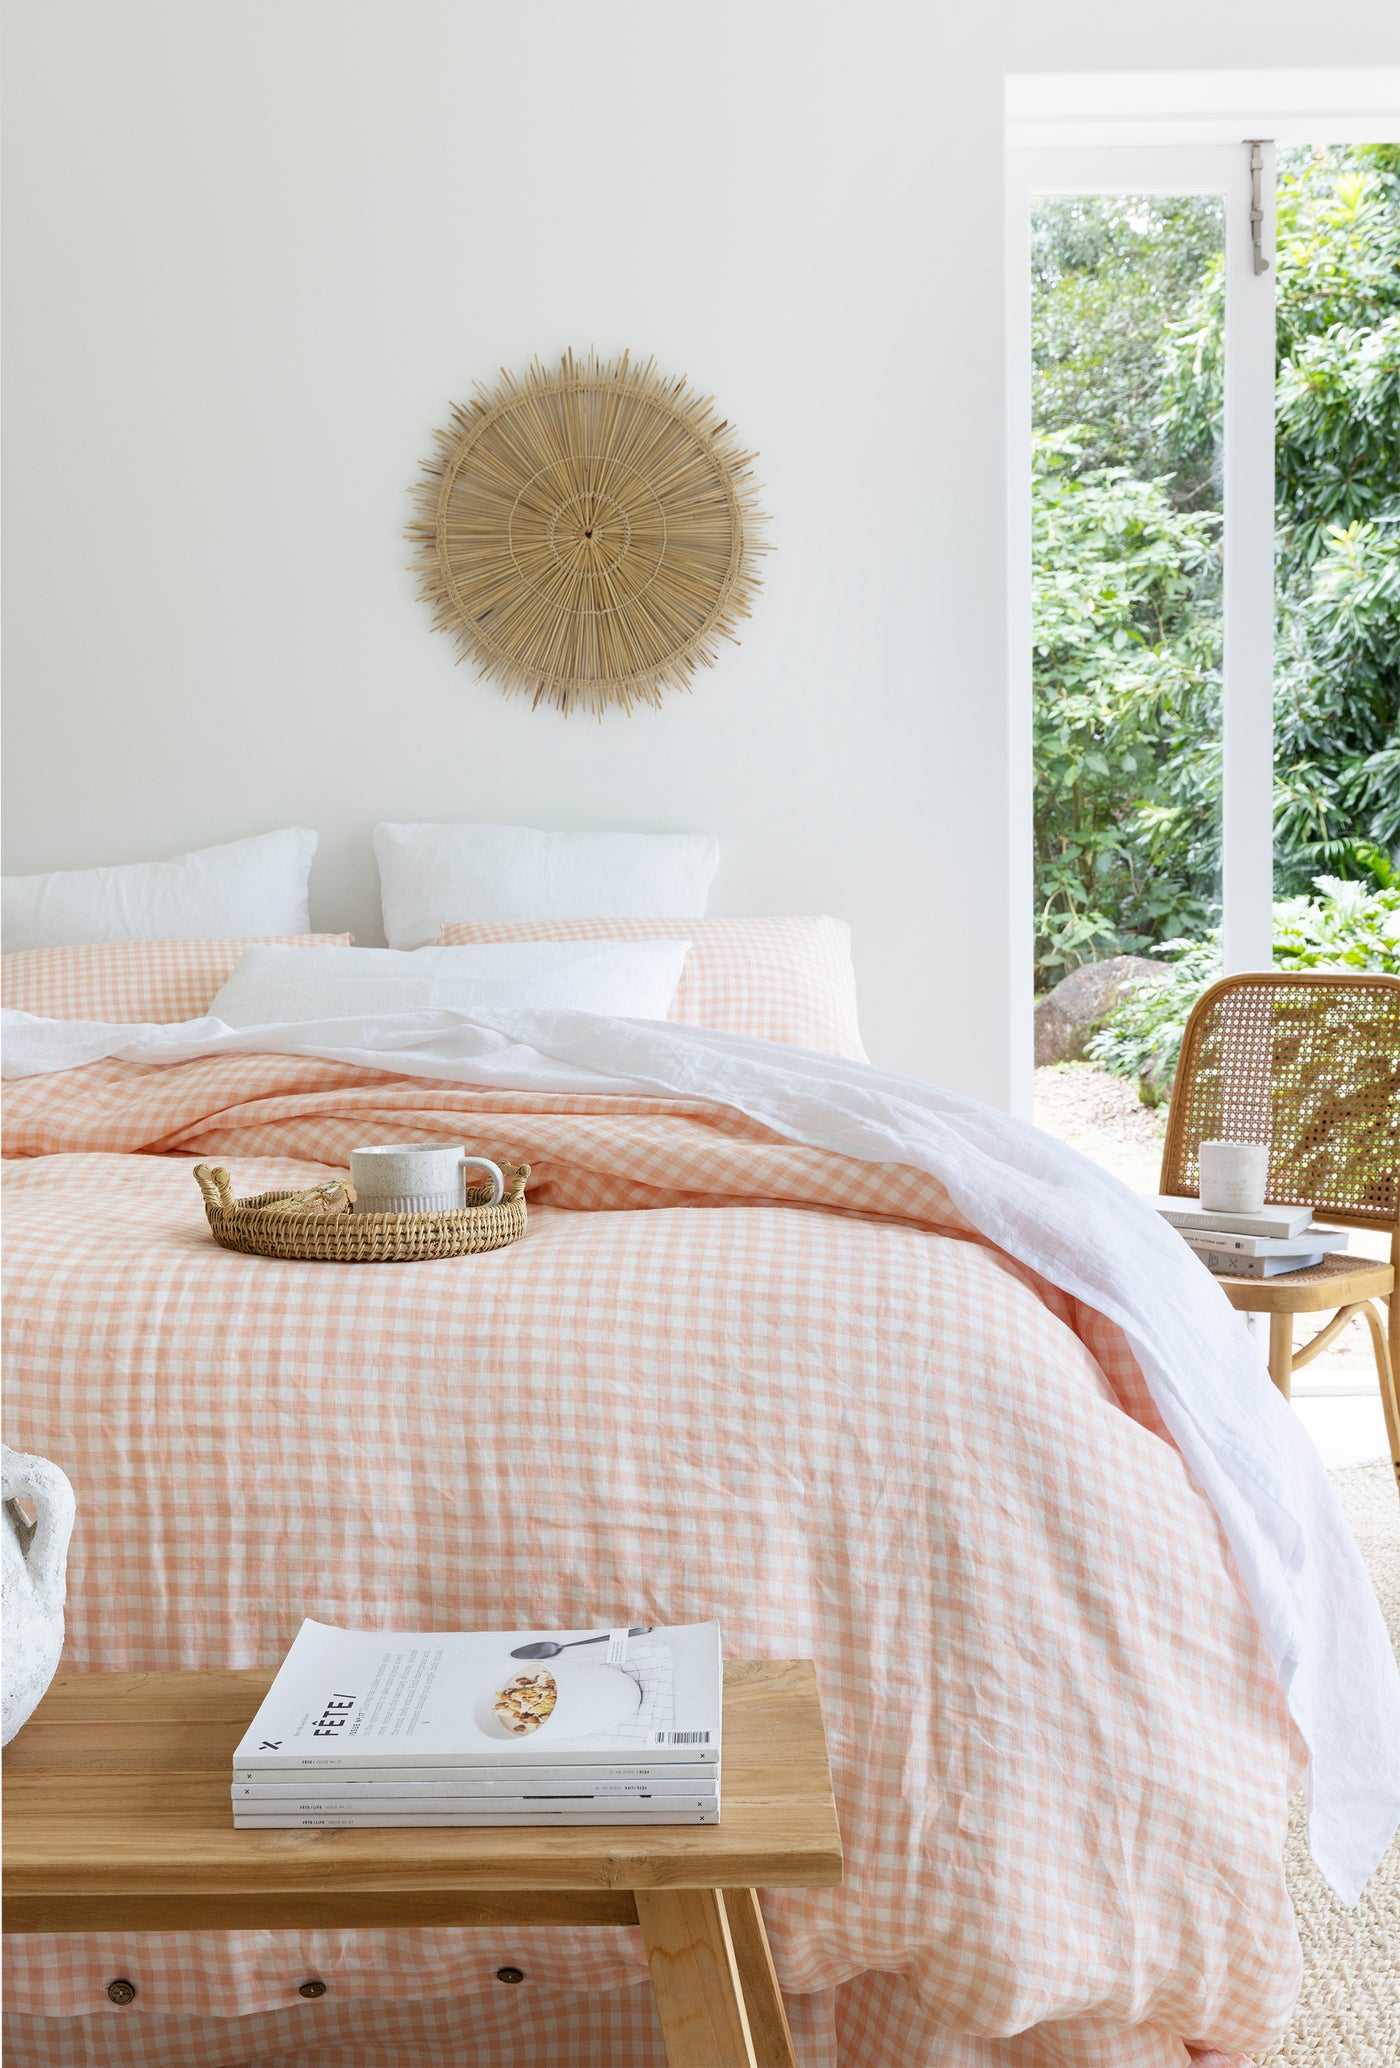 Five ways to freshen up your bedroom this spring - LinenBarn